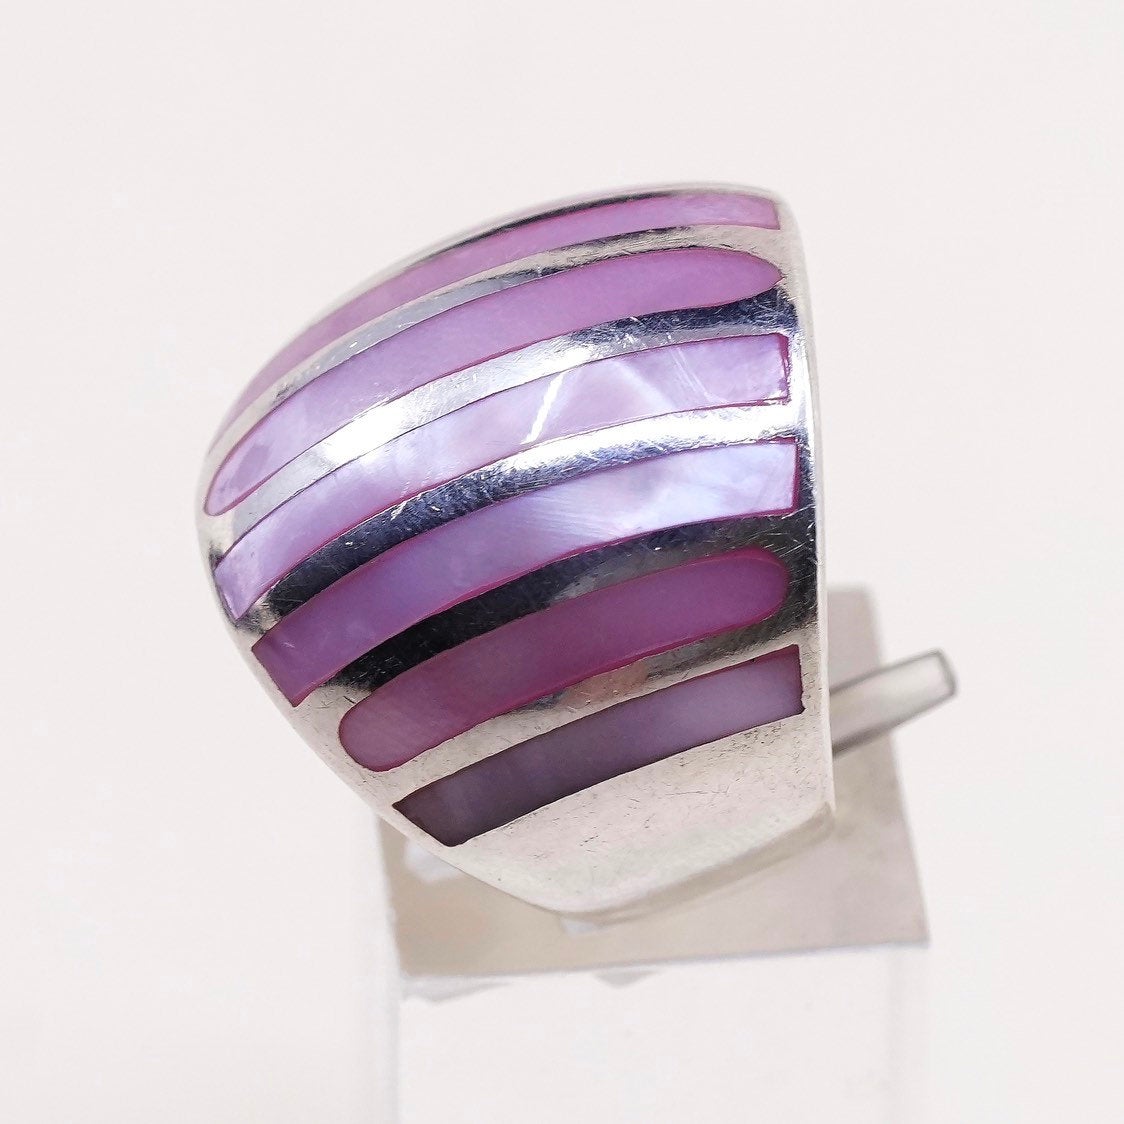 sz 7.5, sterling 925 silver handmade ring band w/ pink mother of pearl stripes